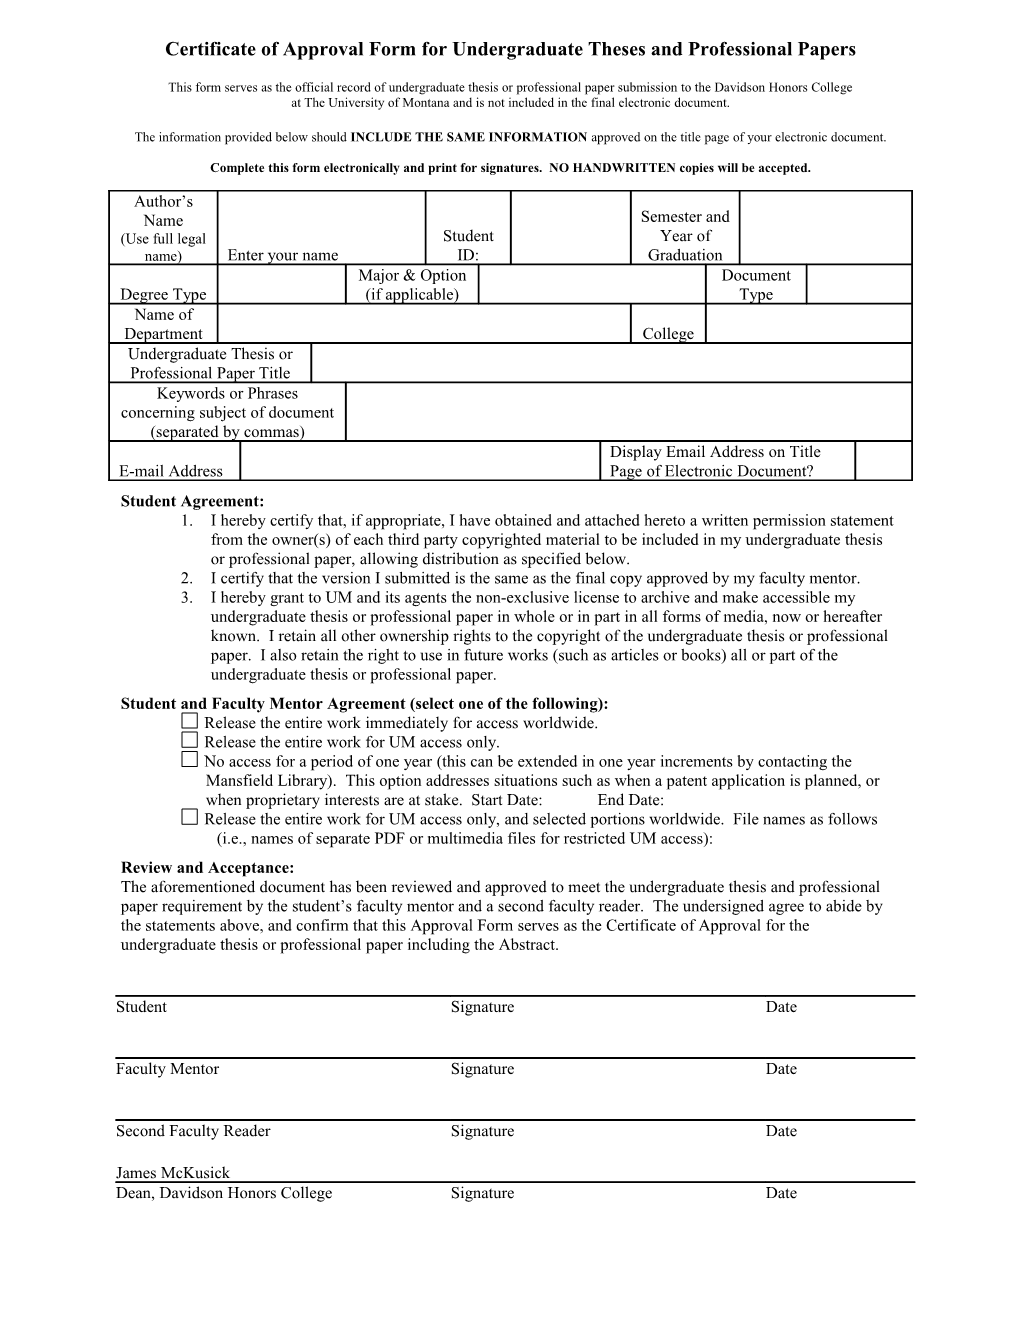 Certificate of Approval Form for Theses, Dissertations and Professional Papers